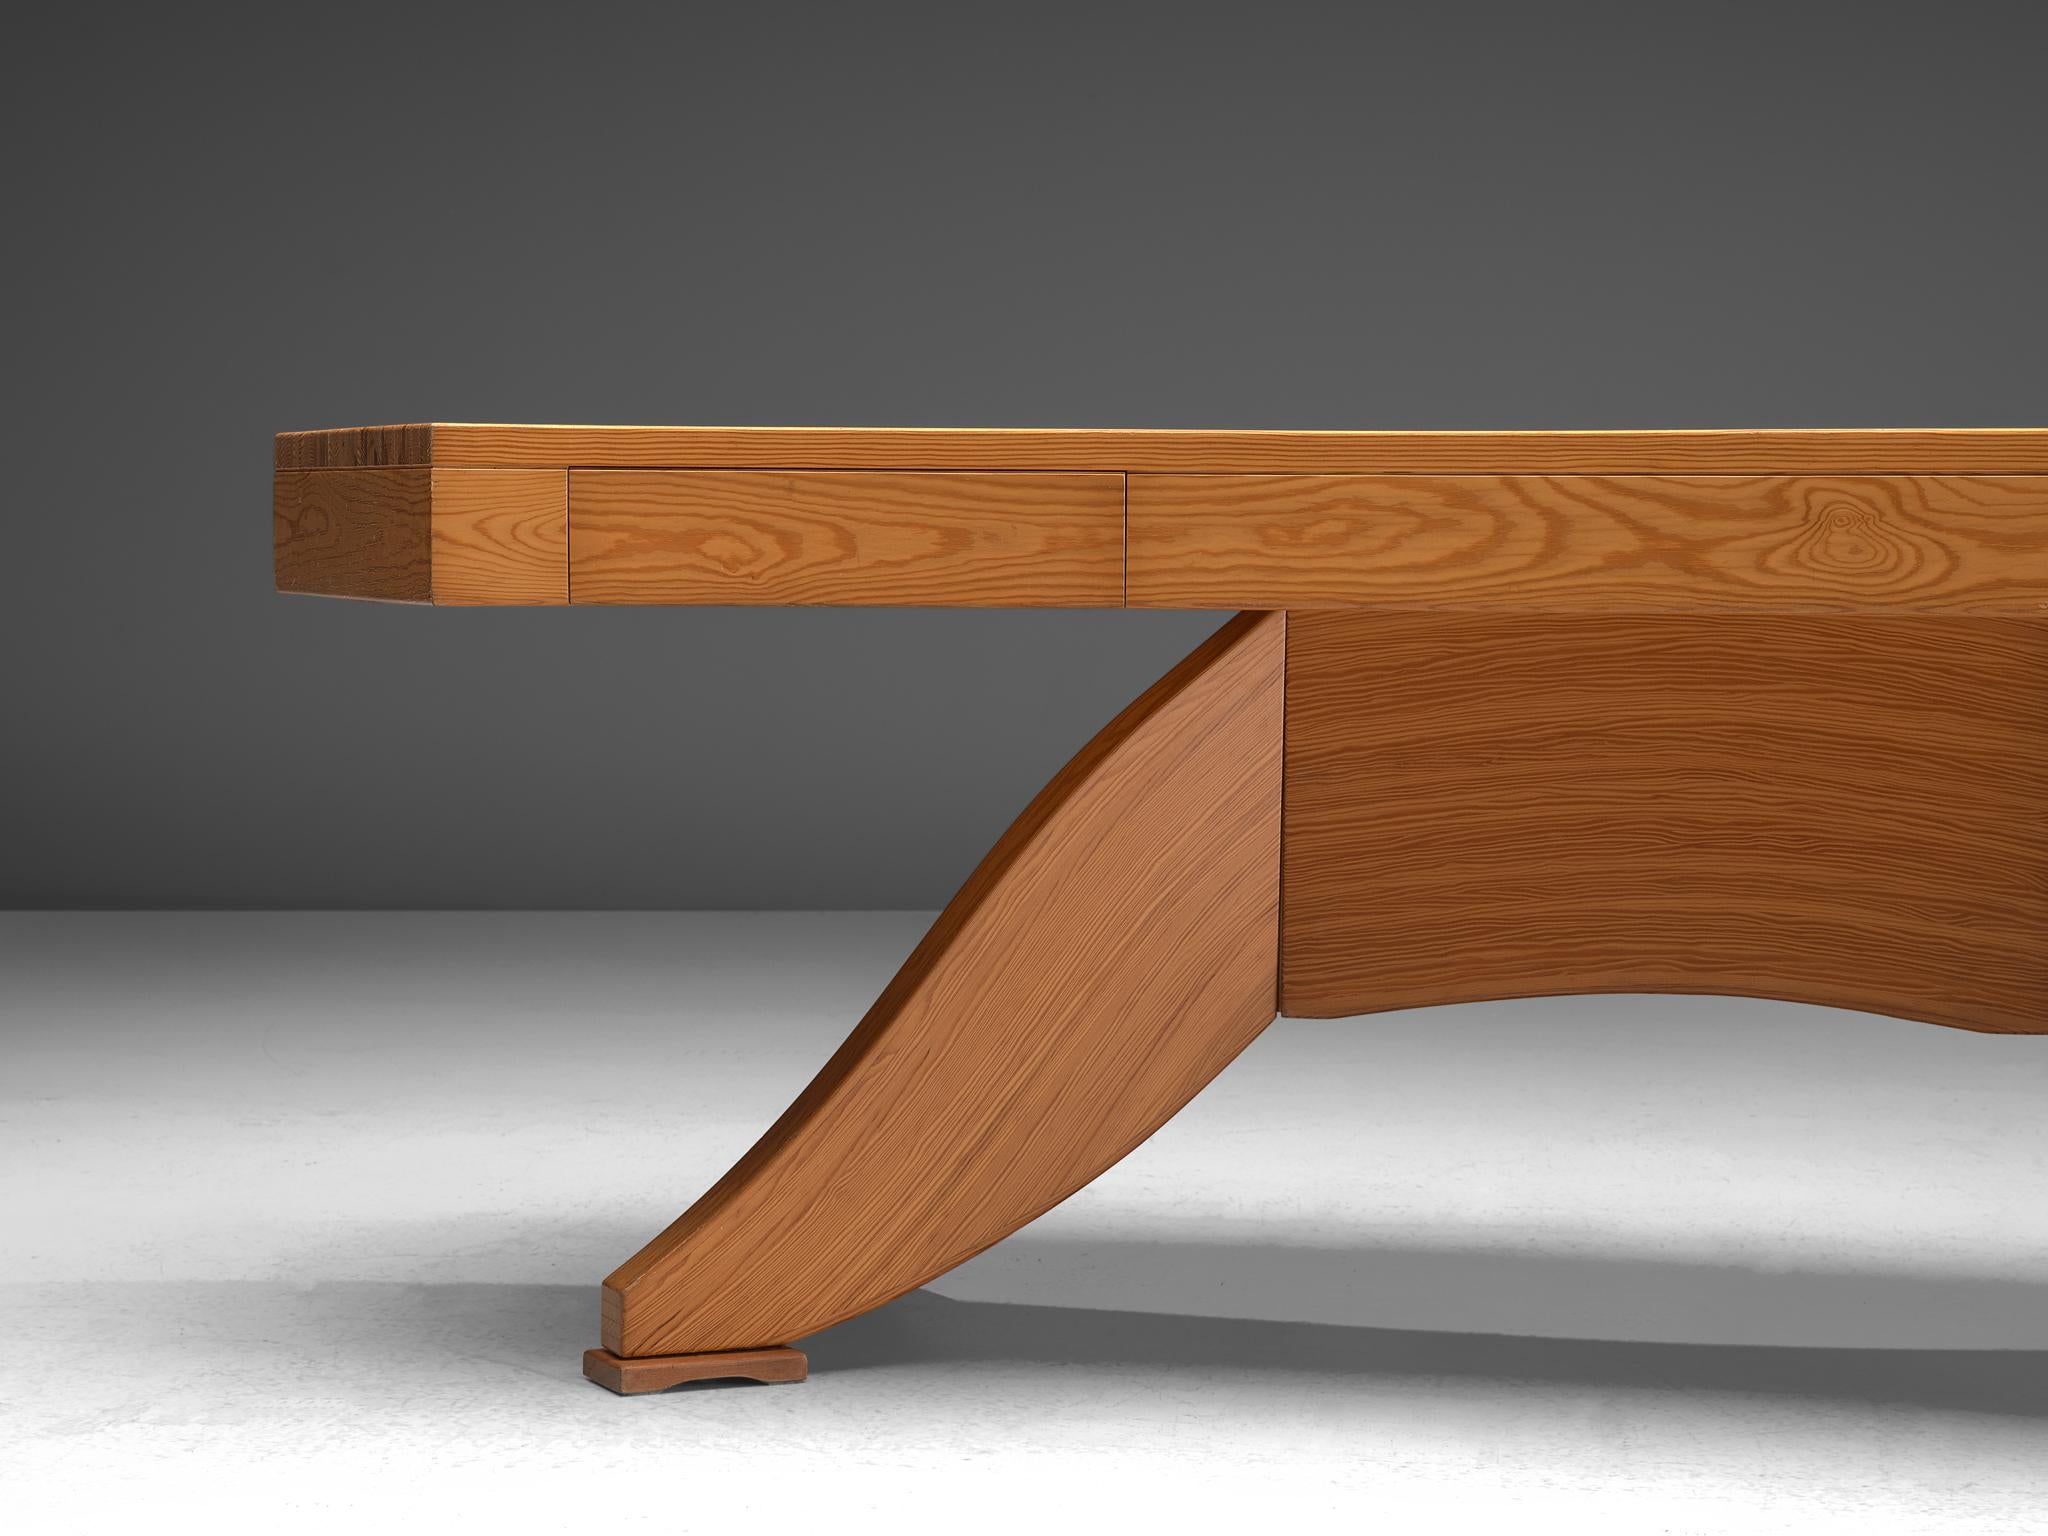 Scandinavian Pine Table with Curved Table Top 2